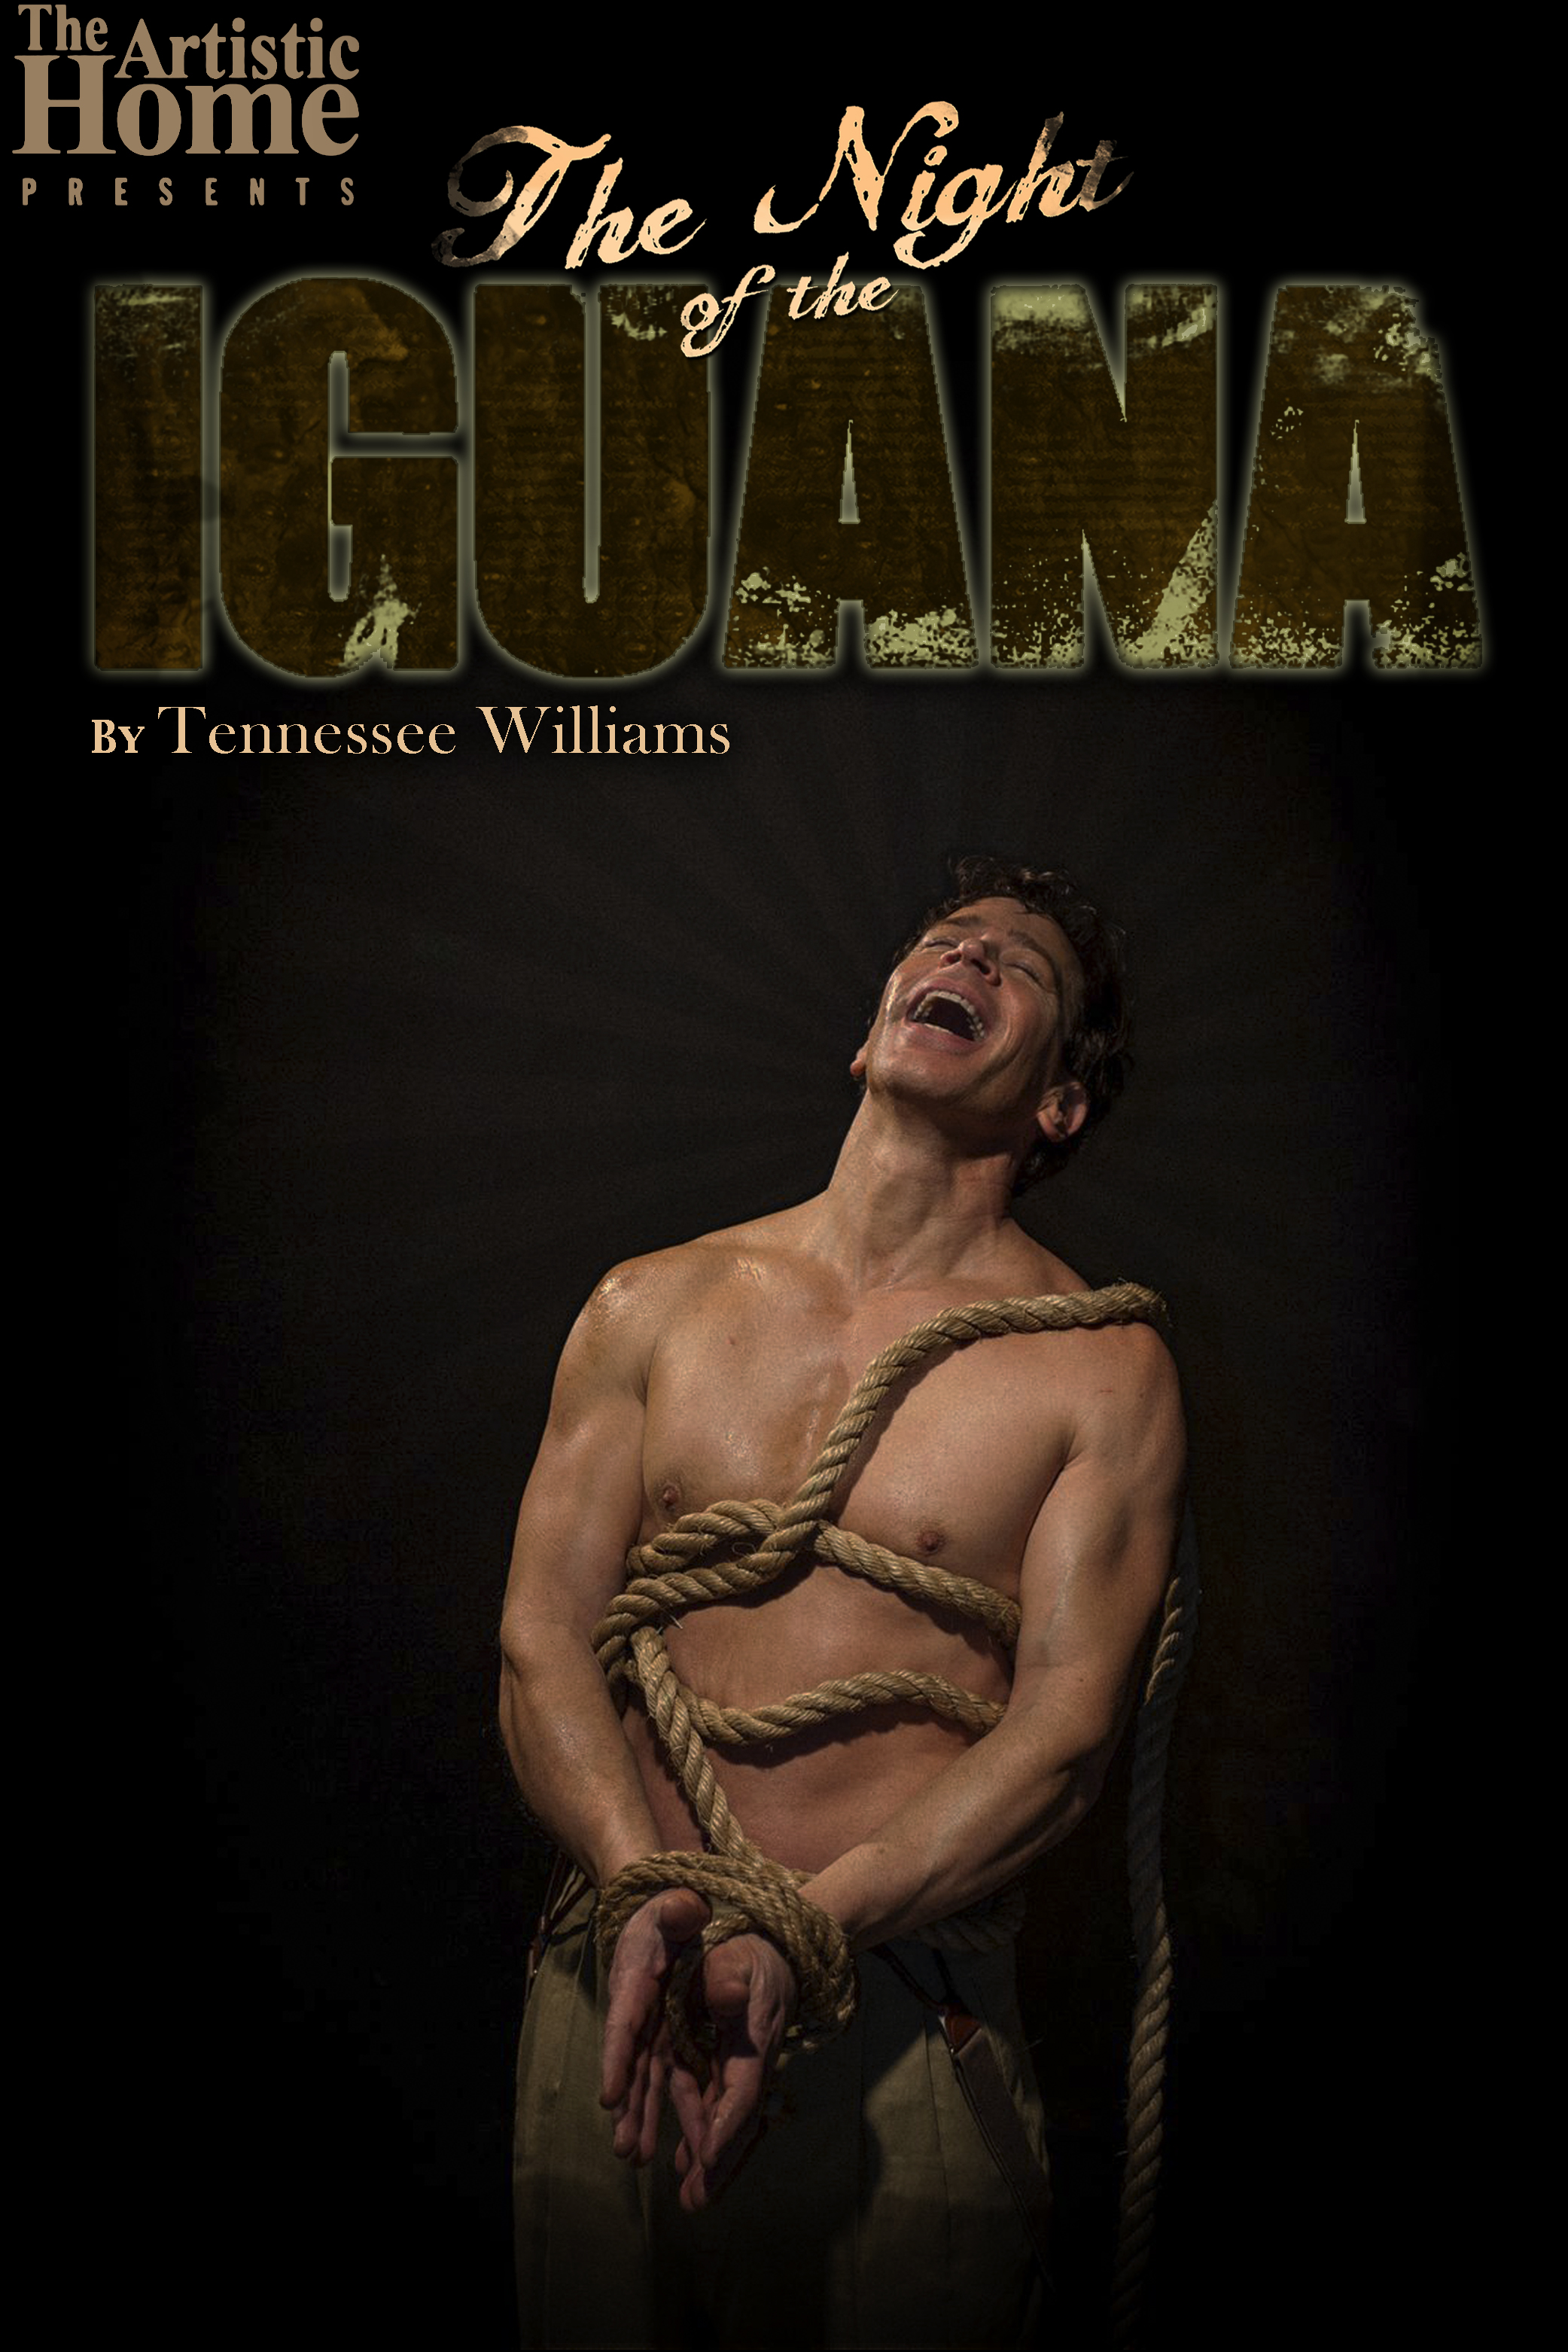 John Mossman as the Reverend Shannon in The Artistic Home's acclaimed production of The Night of the Iguana.